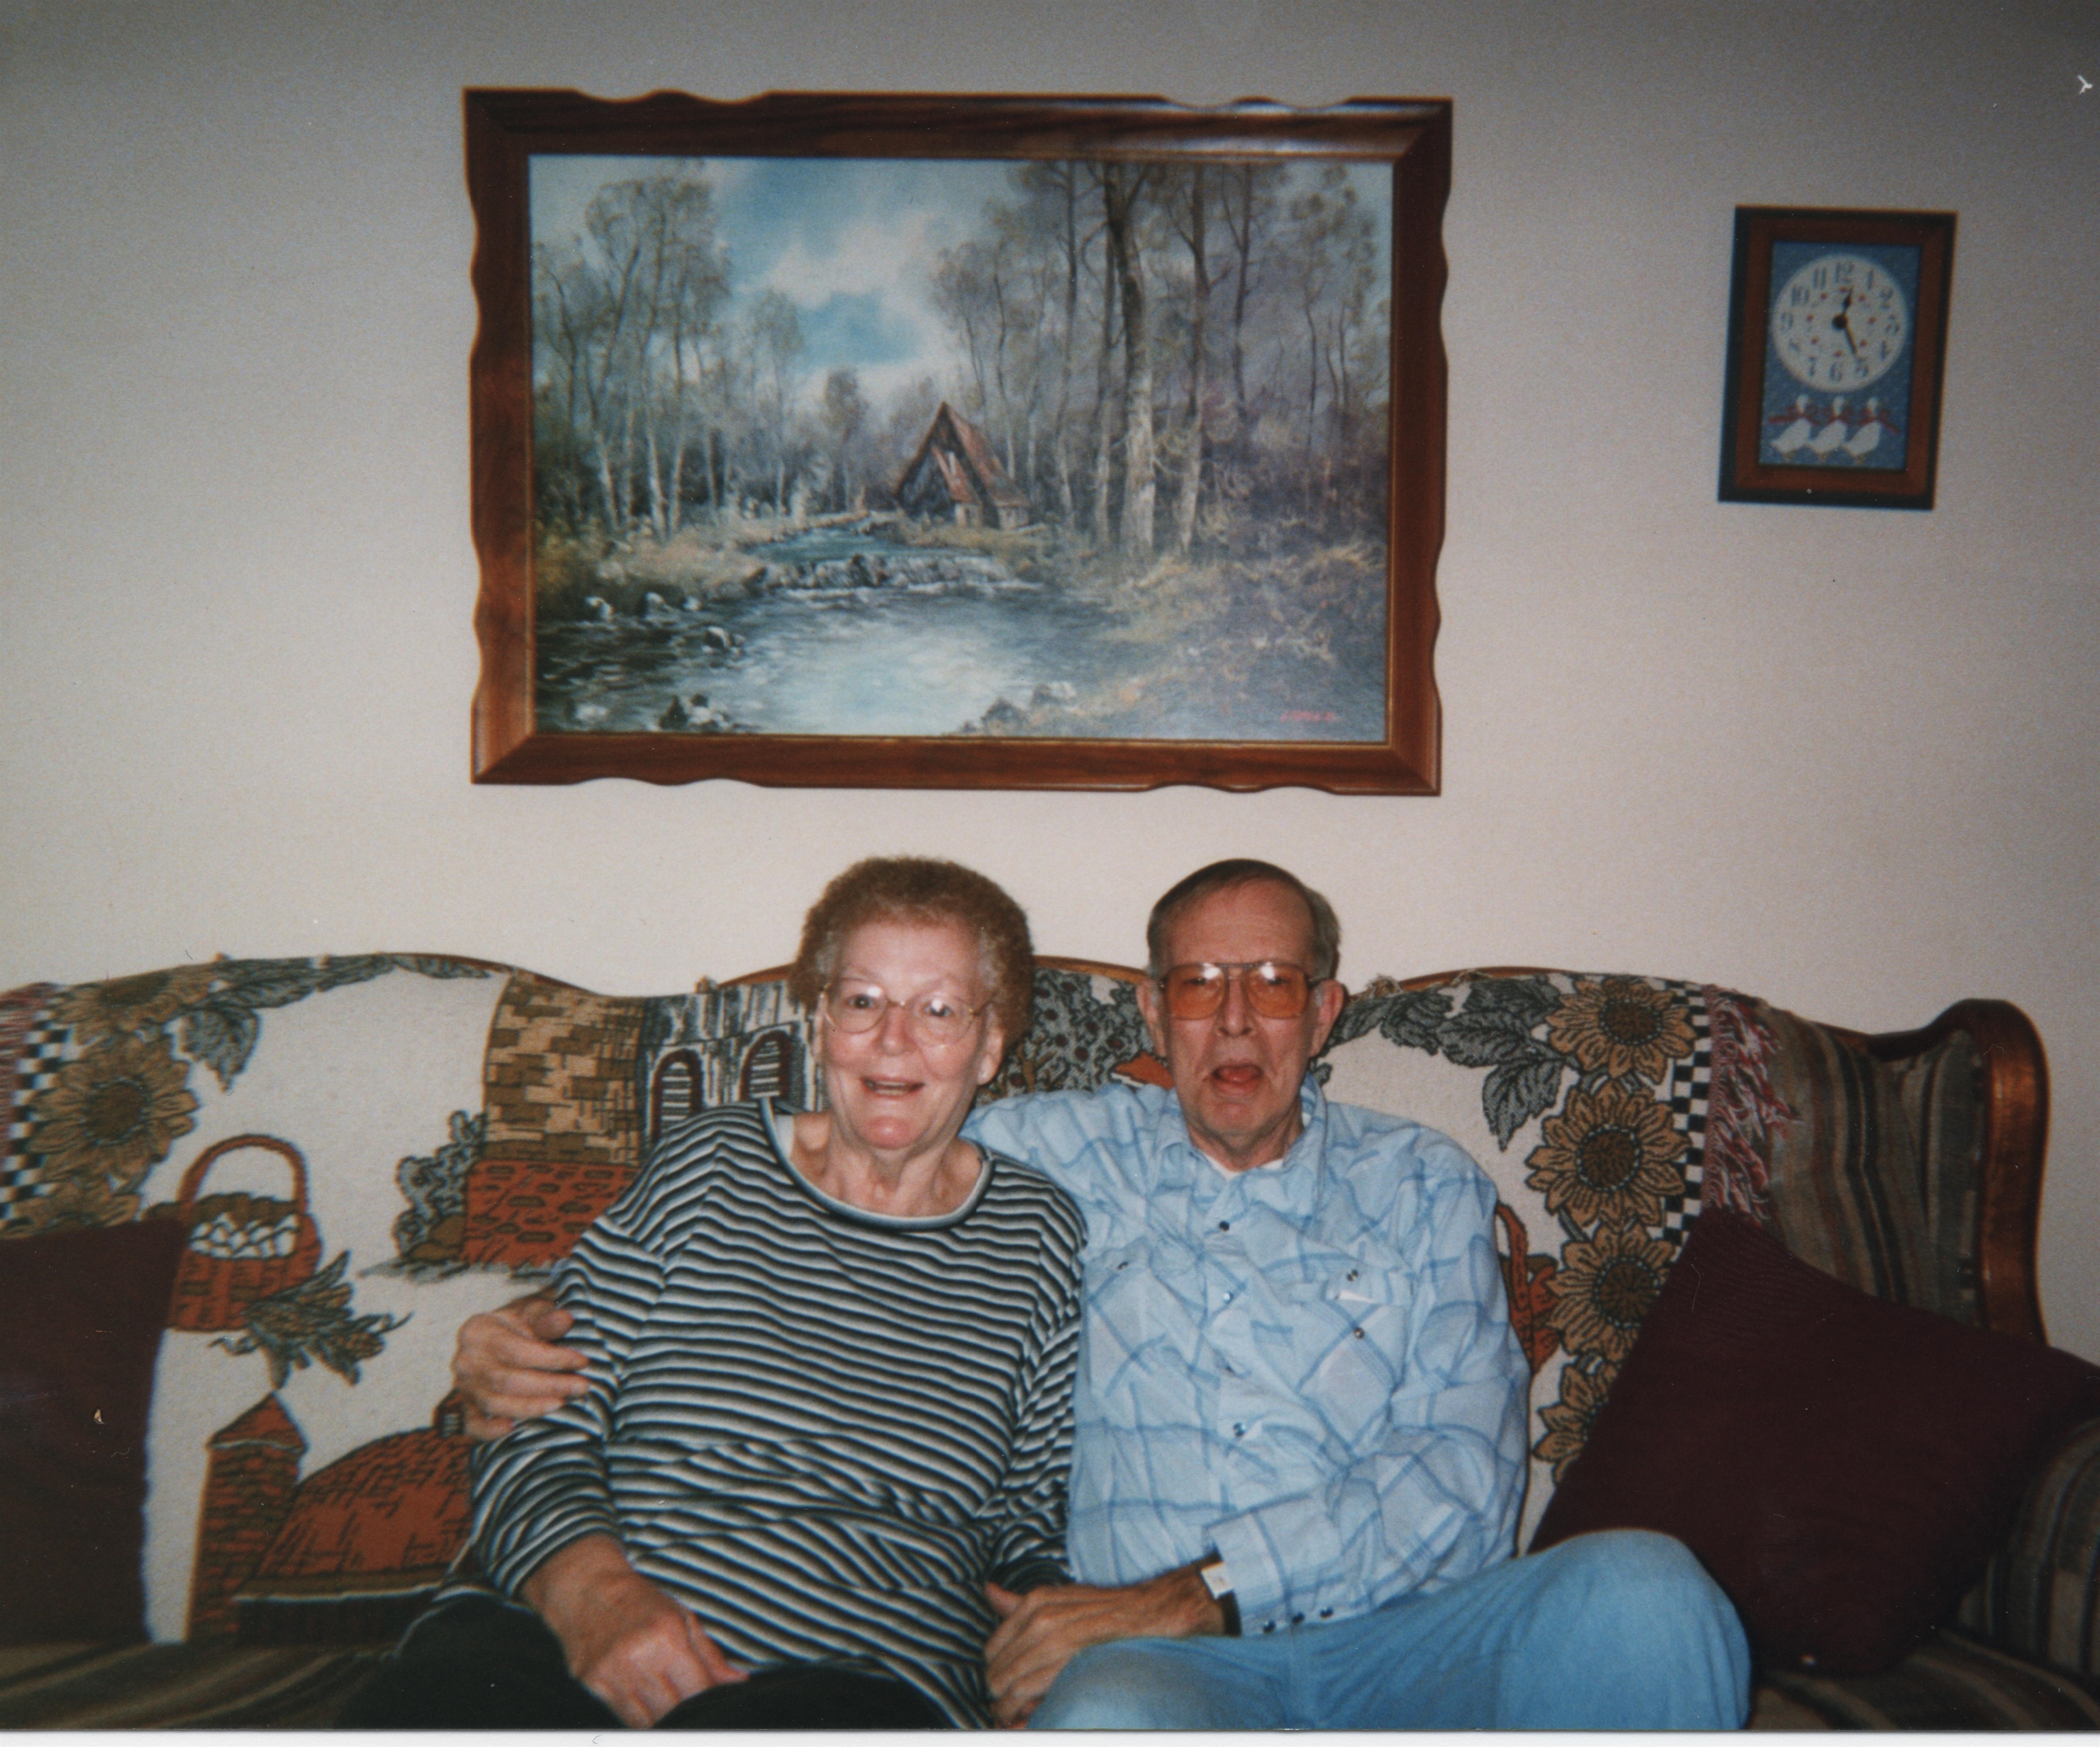 Caruthers Allen, Amy (1924-2009)
